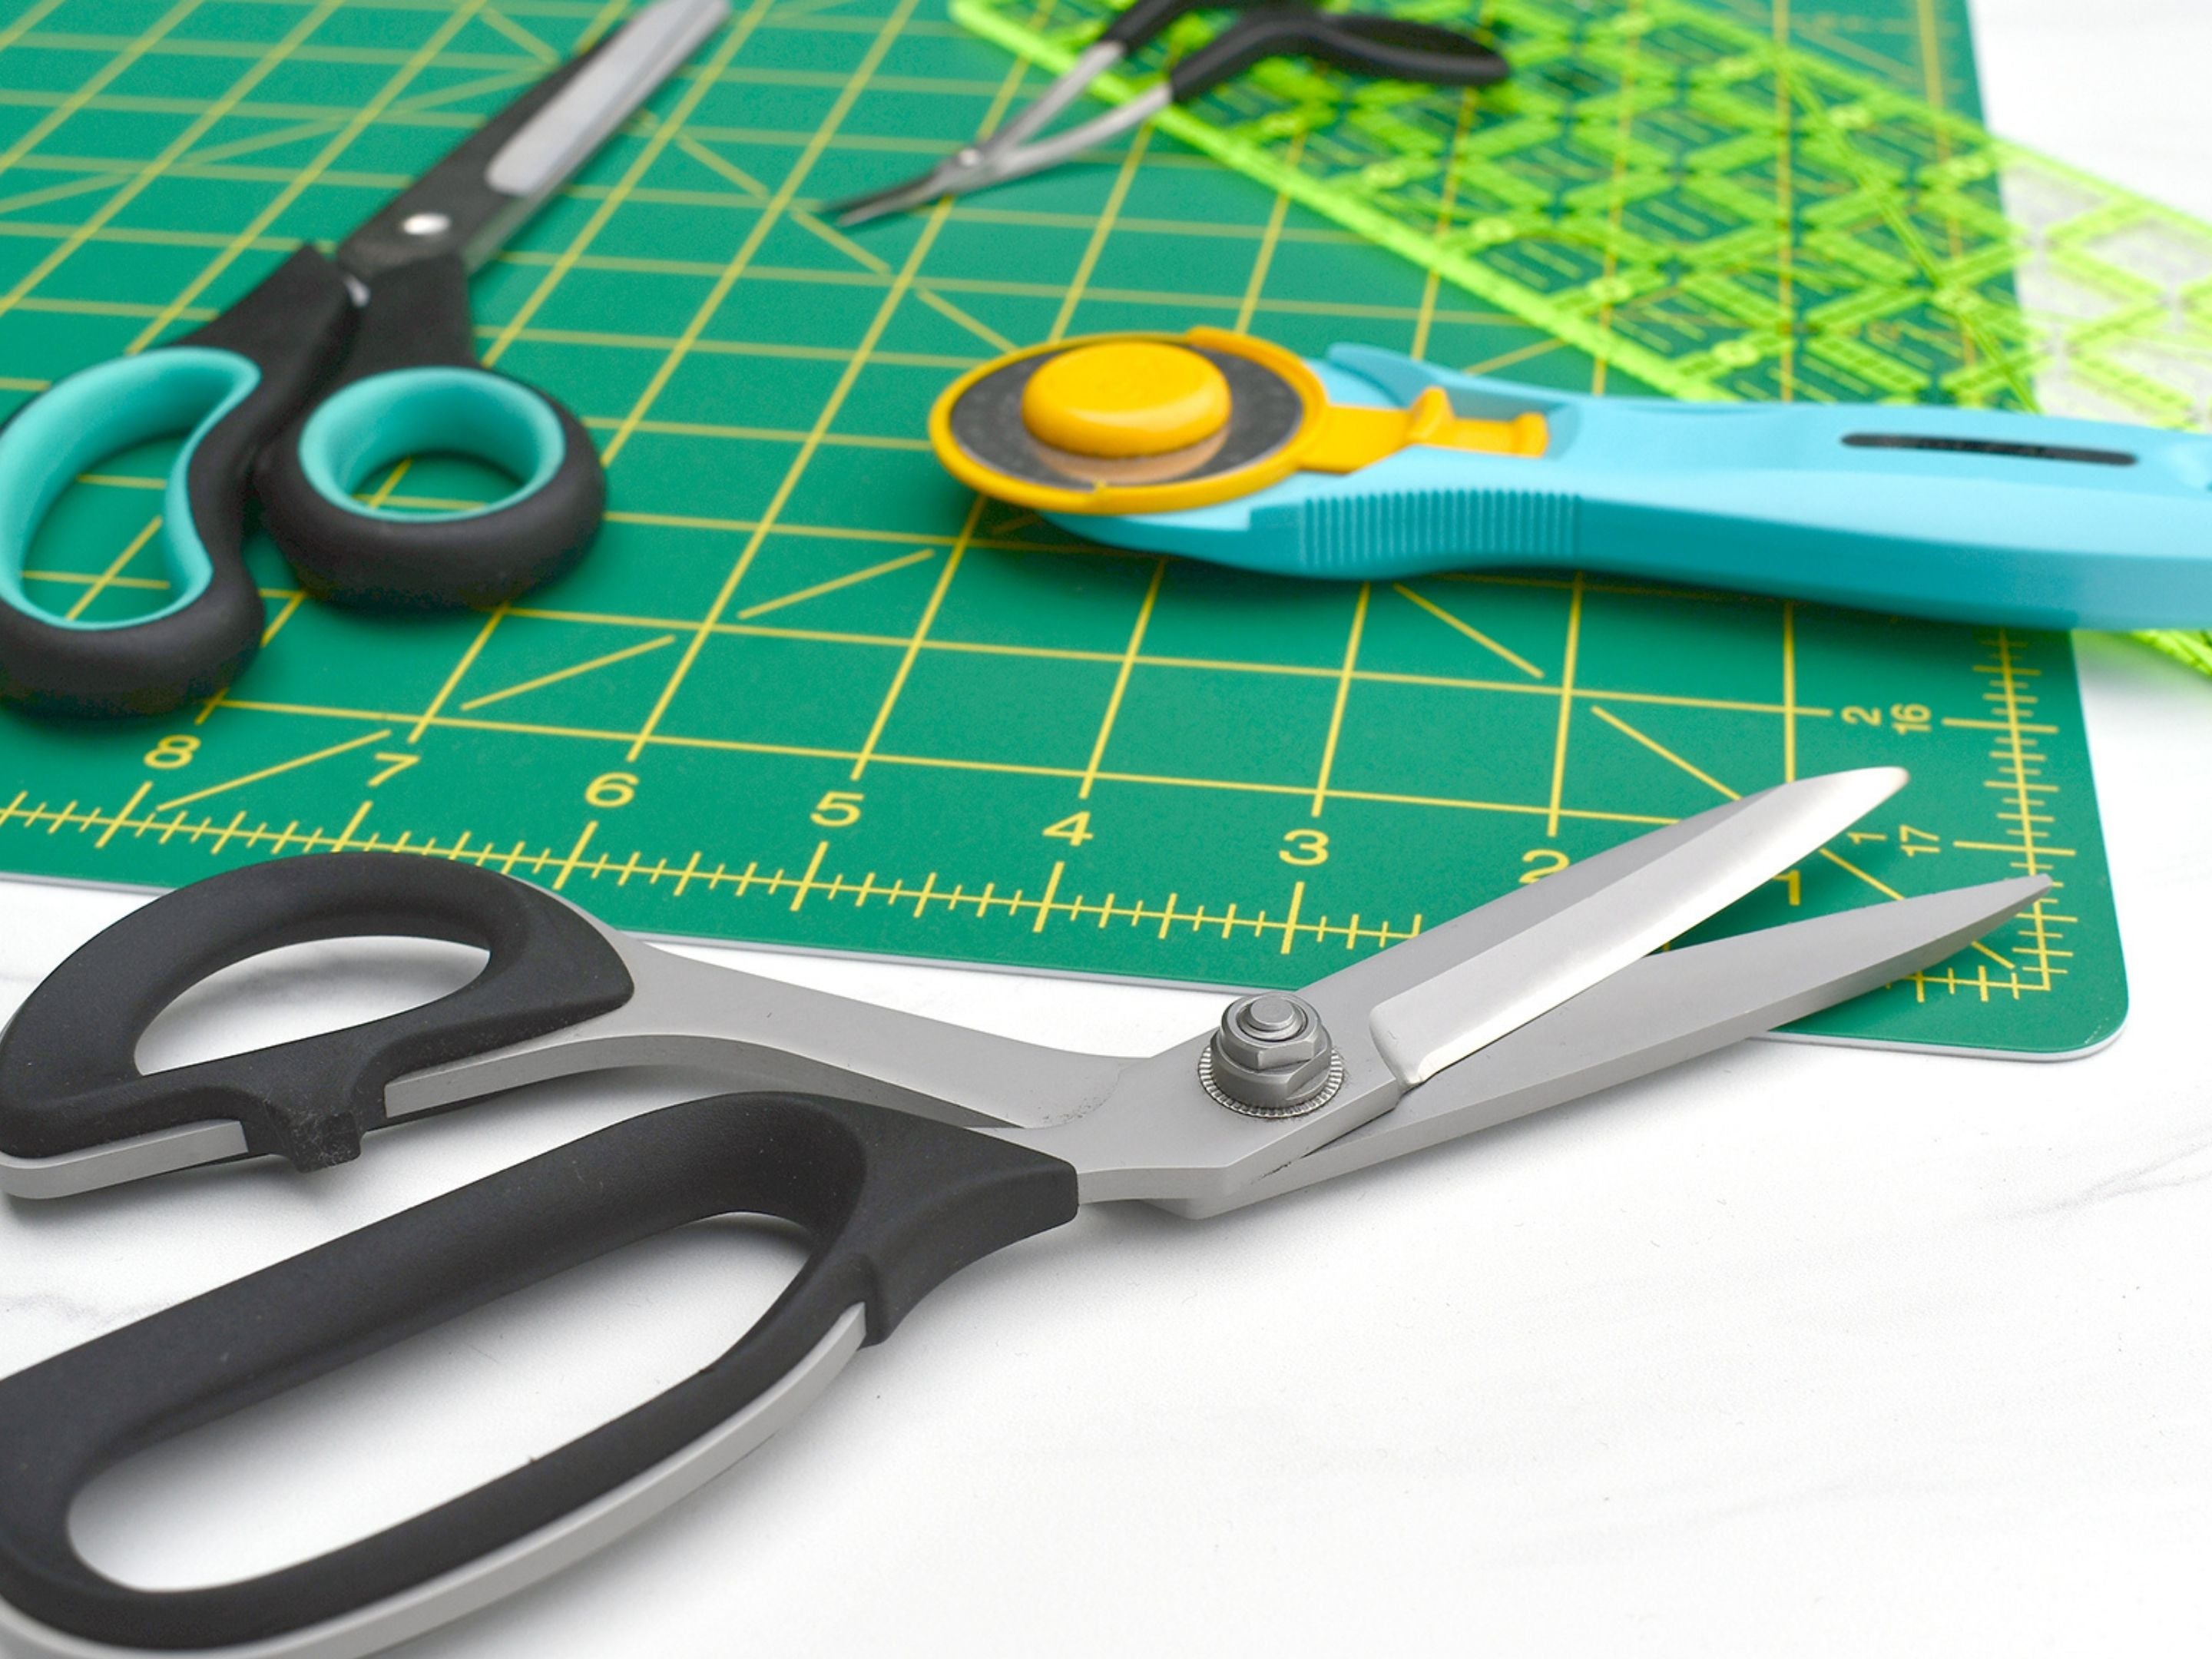 Scissors and Cutting Tools for Sewing